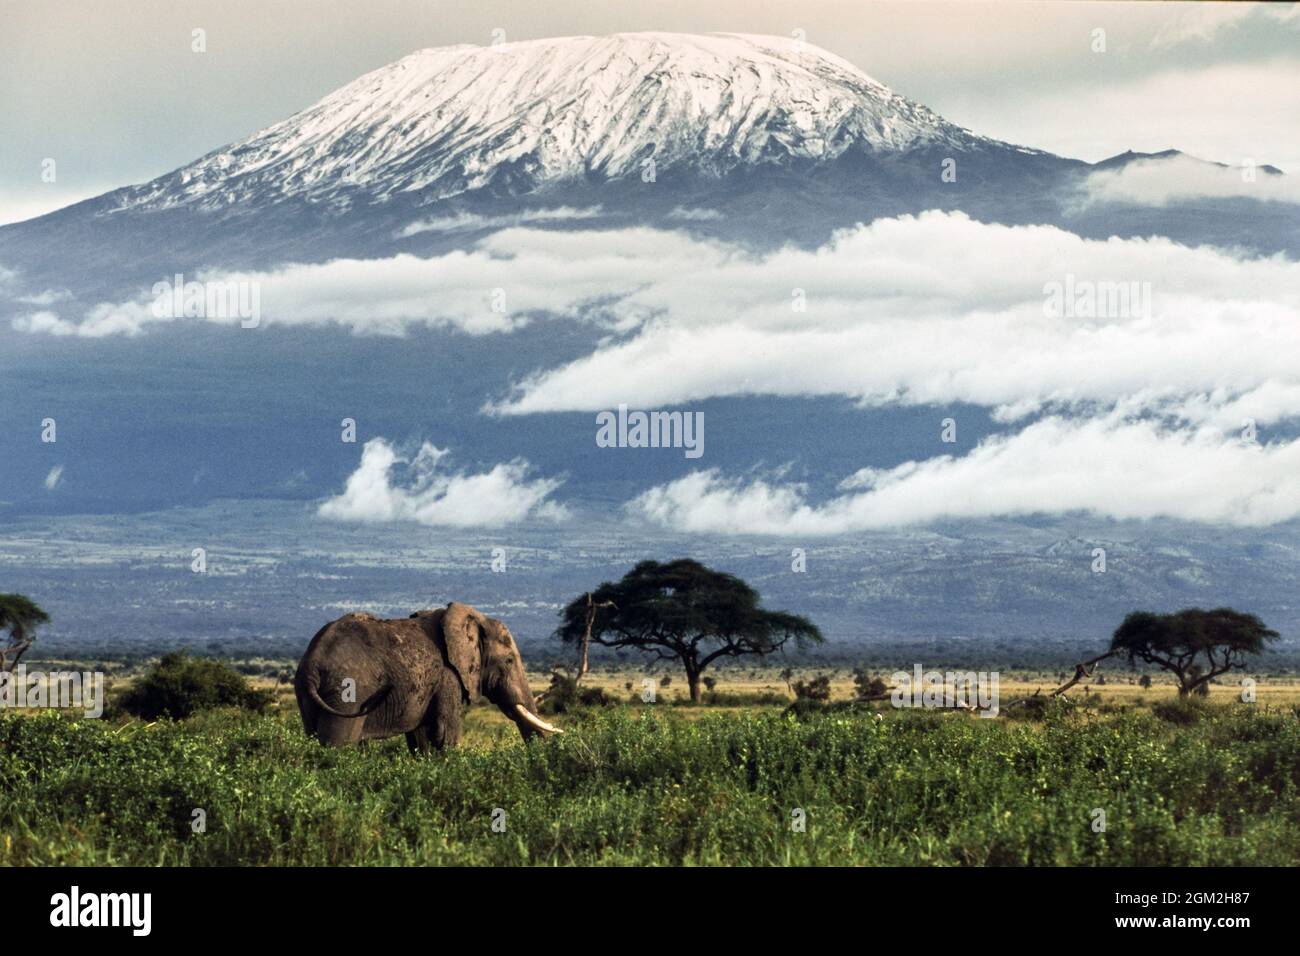 Mount Kilimanjaro with its snow-covered peak in 1989. In the foreground an elephant in Amboseli National Park, Kenya, Africa Stock Photo